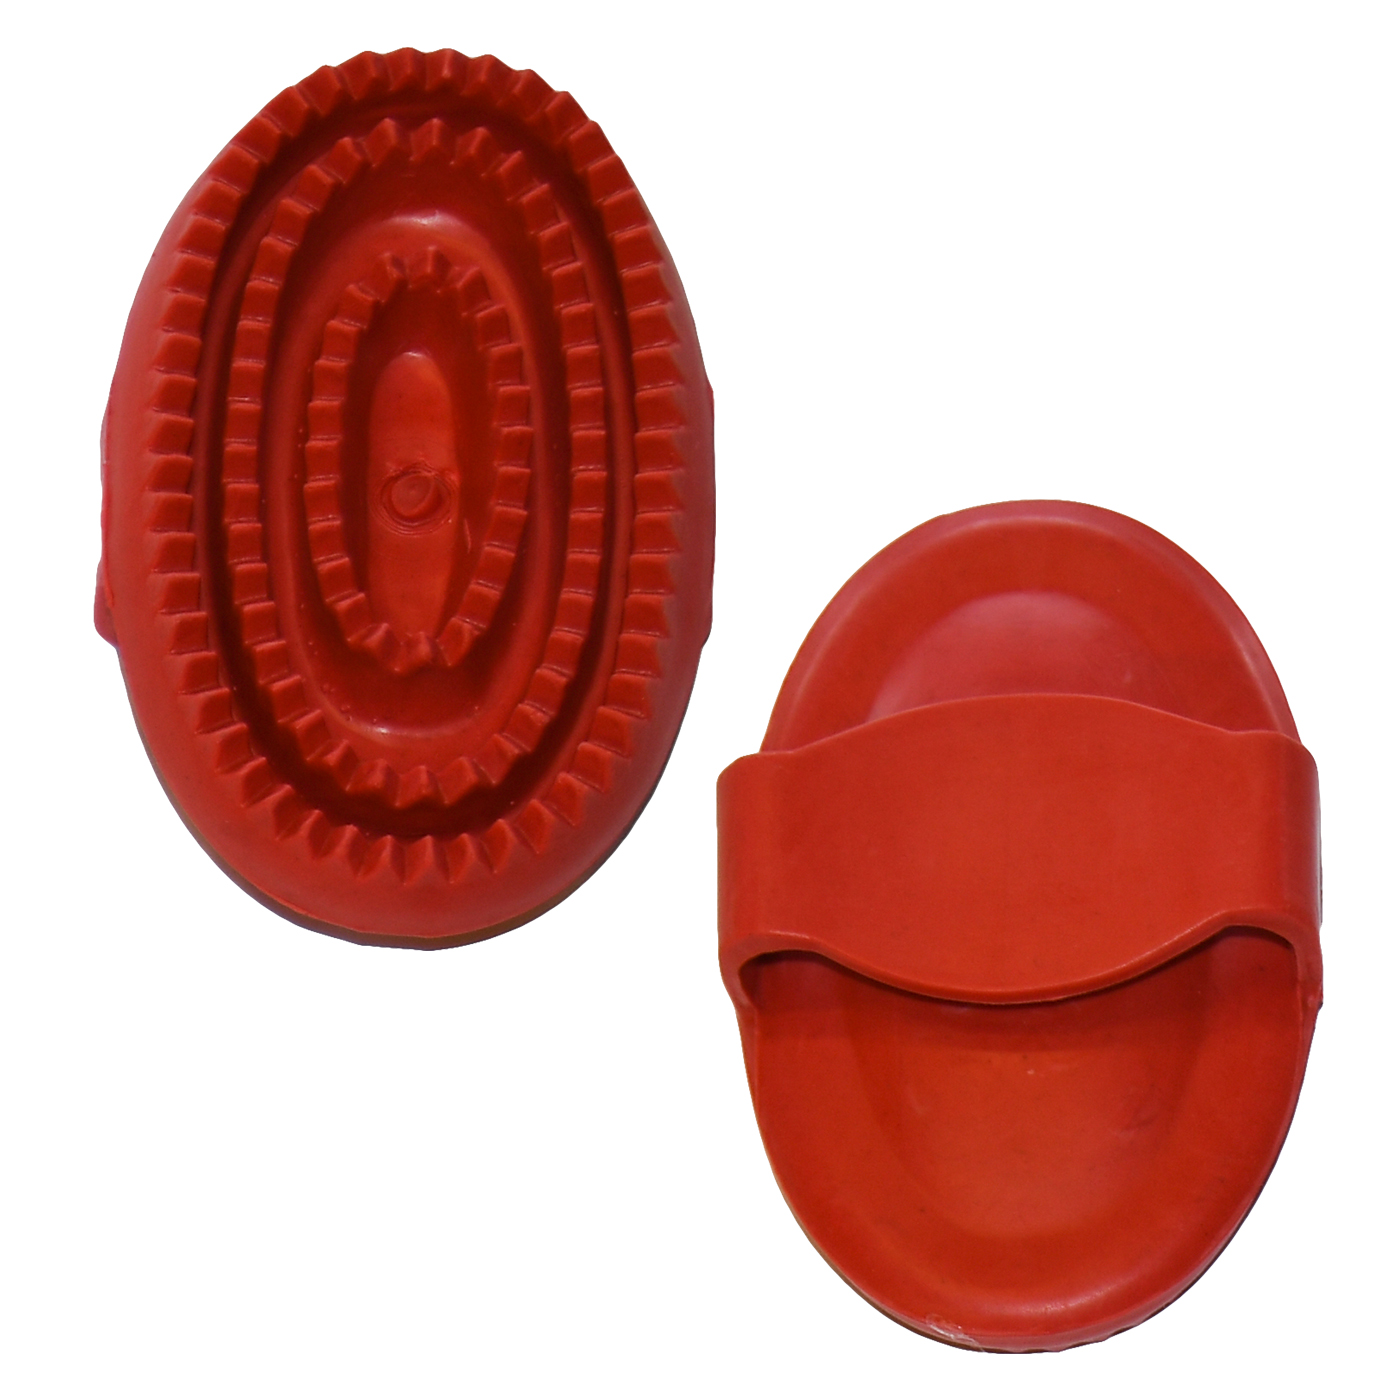 The top and bottom of the small rubber curry